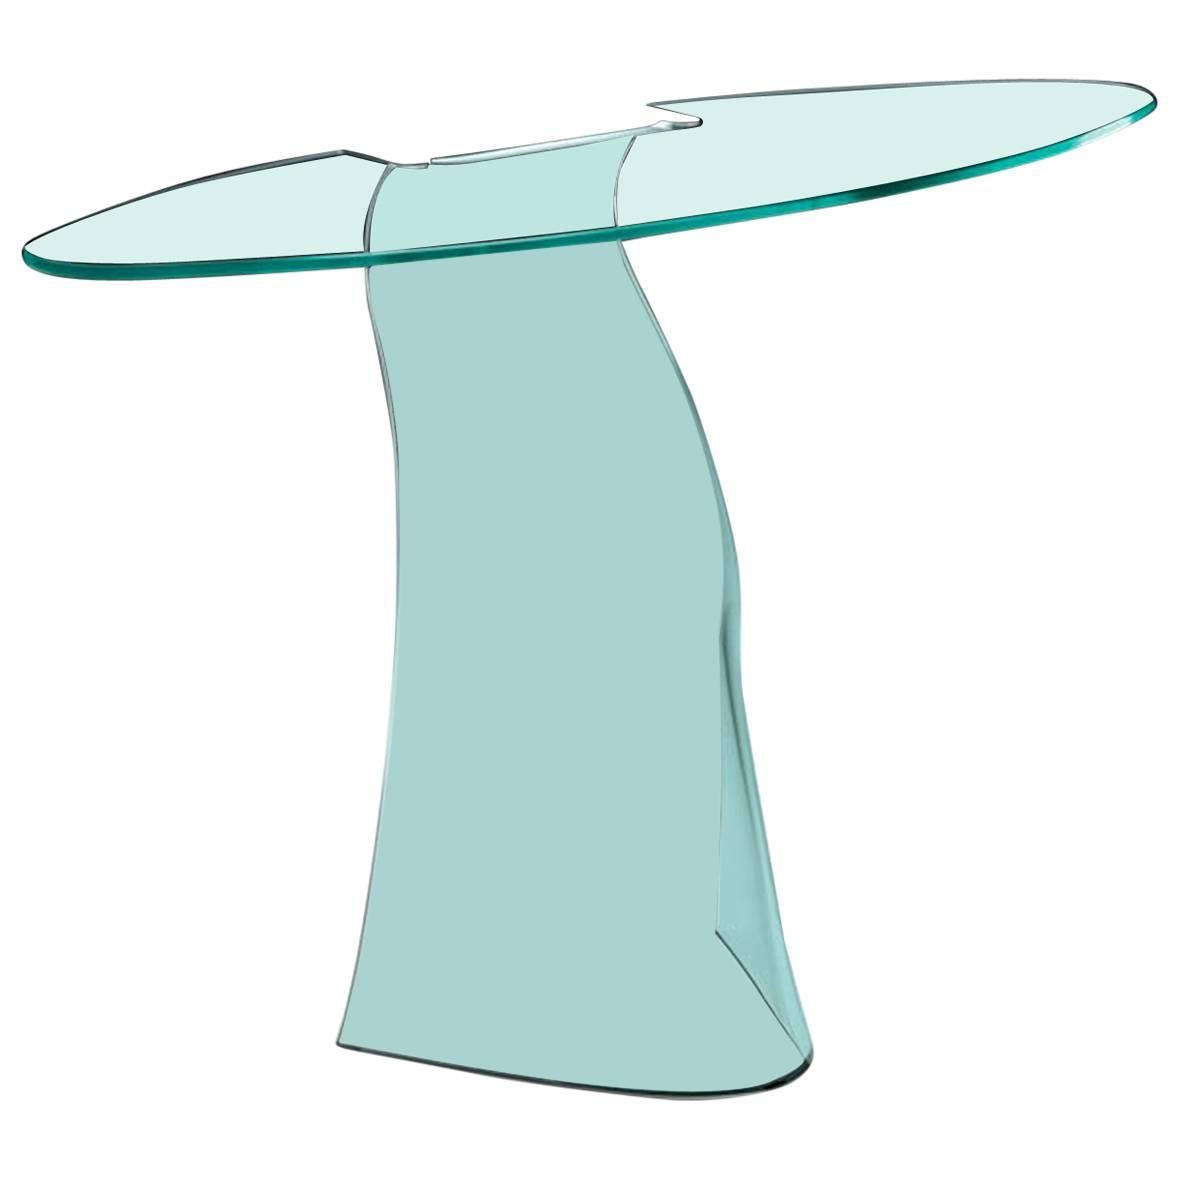 Charme Console Casted in One Slab of Curved Clear Glass